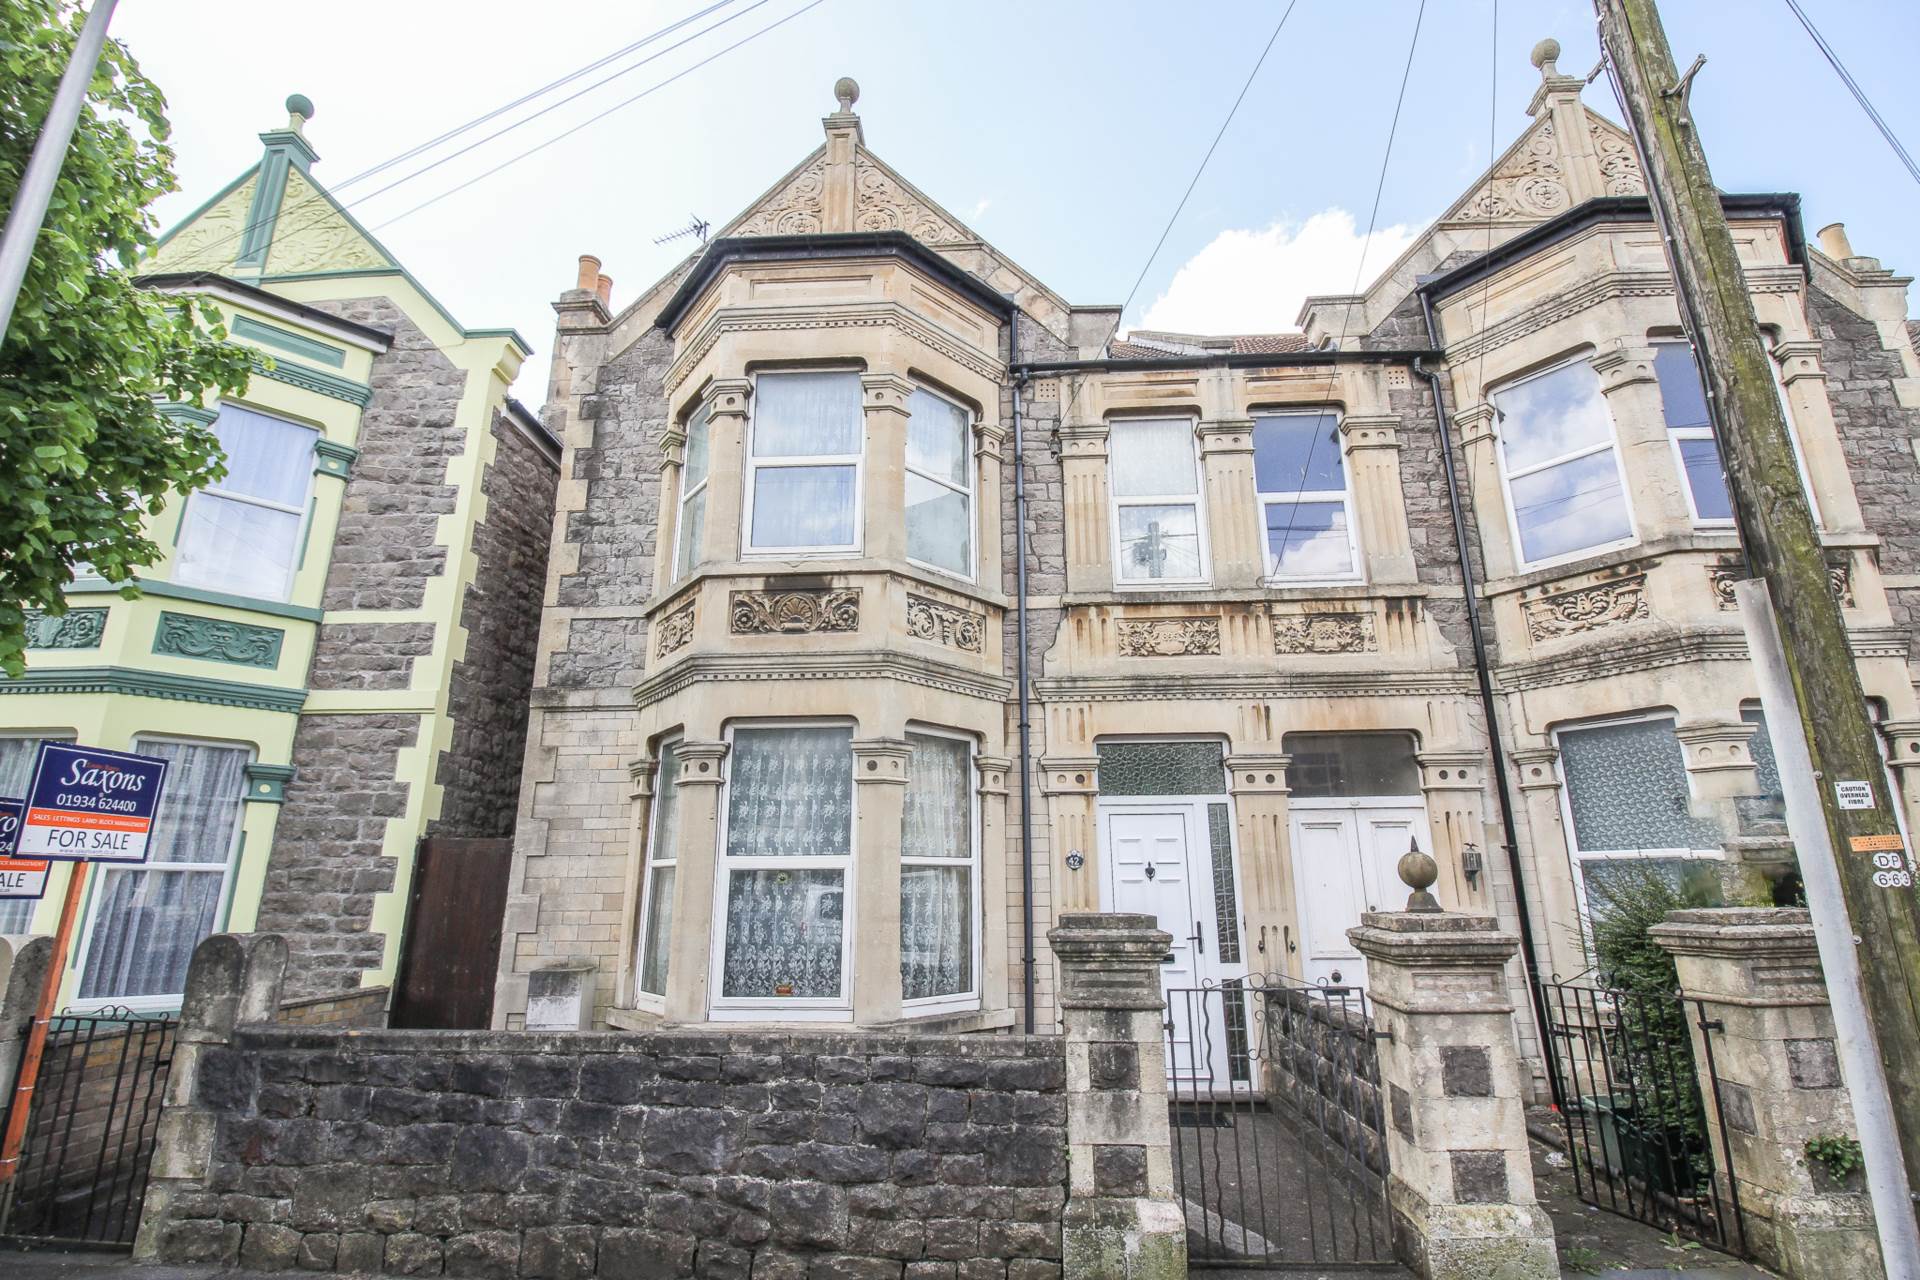 Severn Road-Substantial Victorian Property, Image 1